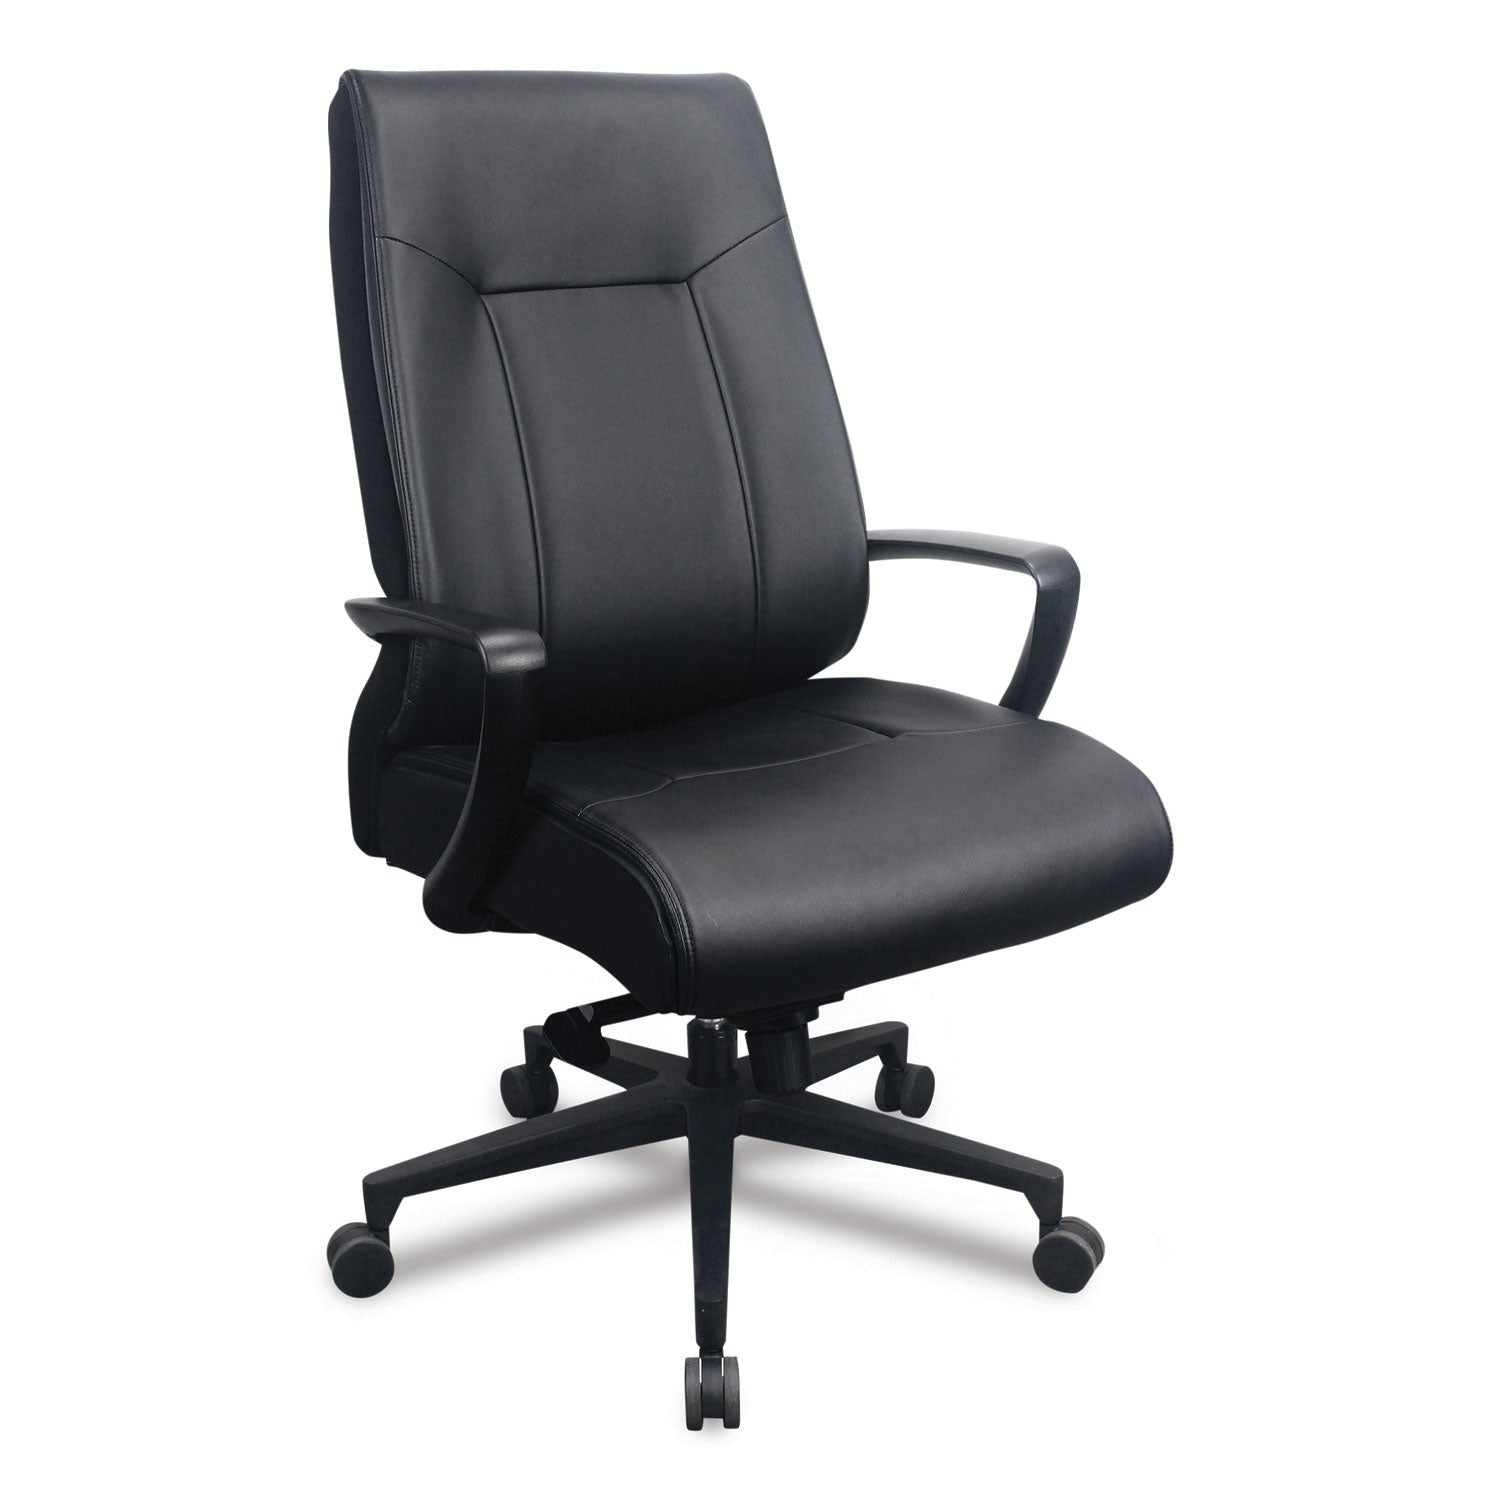 executive-chair-supports-up-to-250-lbs-205-to-235-seat-height-supports-up-to-250-lbs-black_tmetp2500blkl - 2